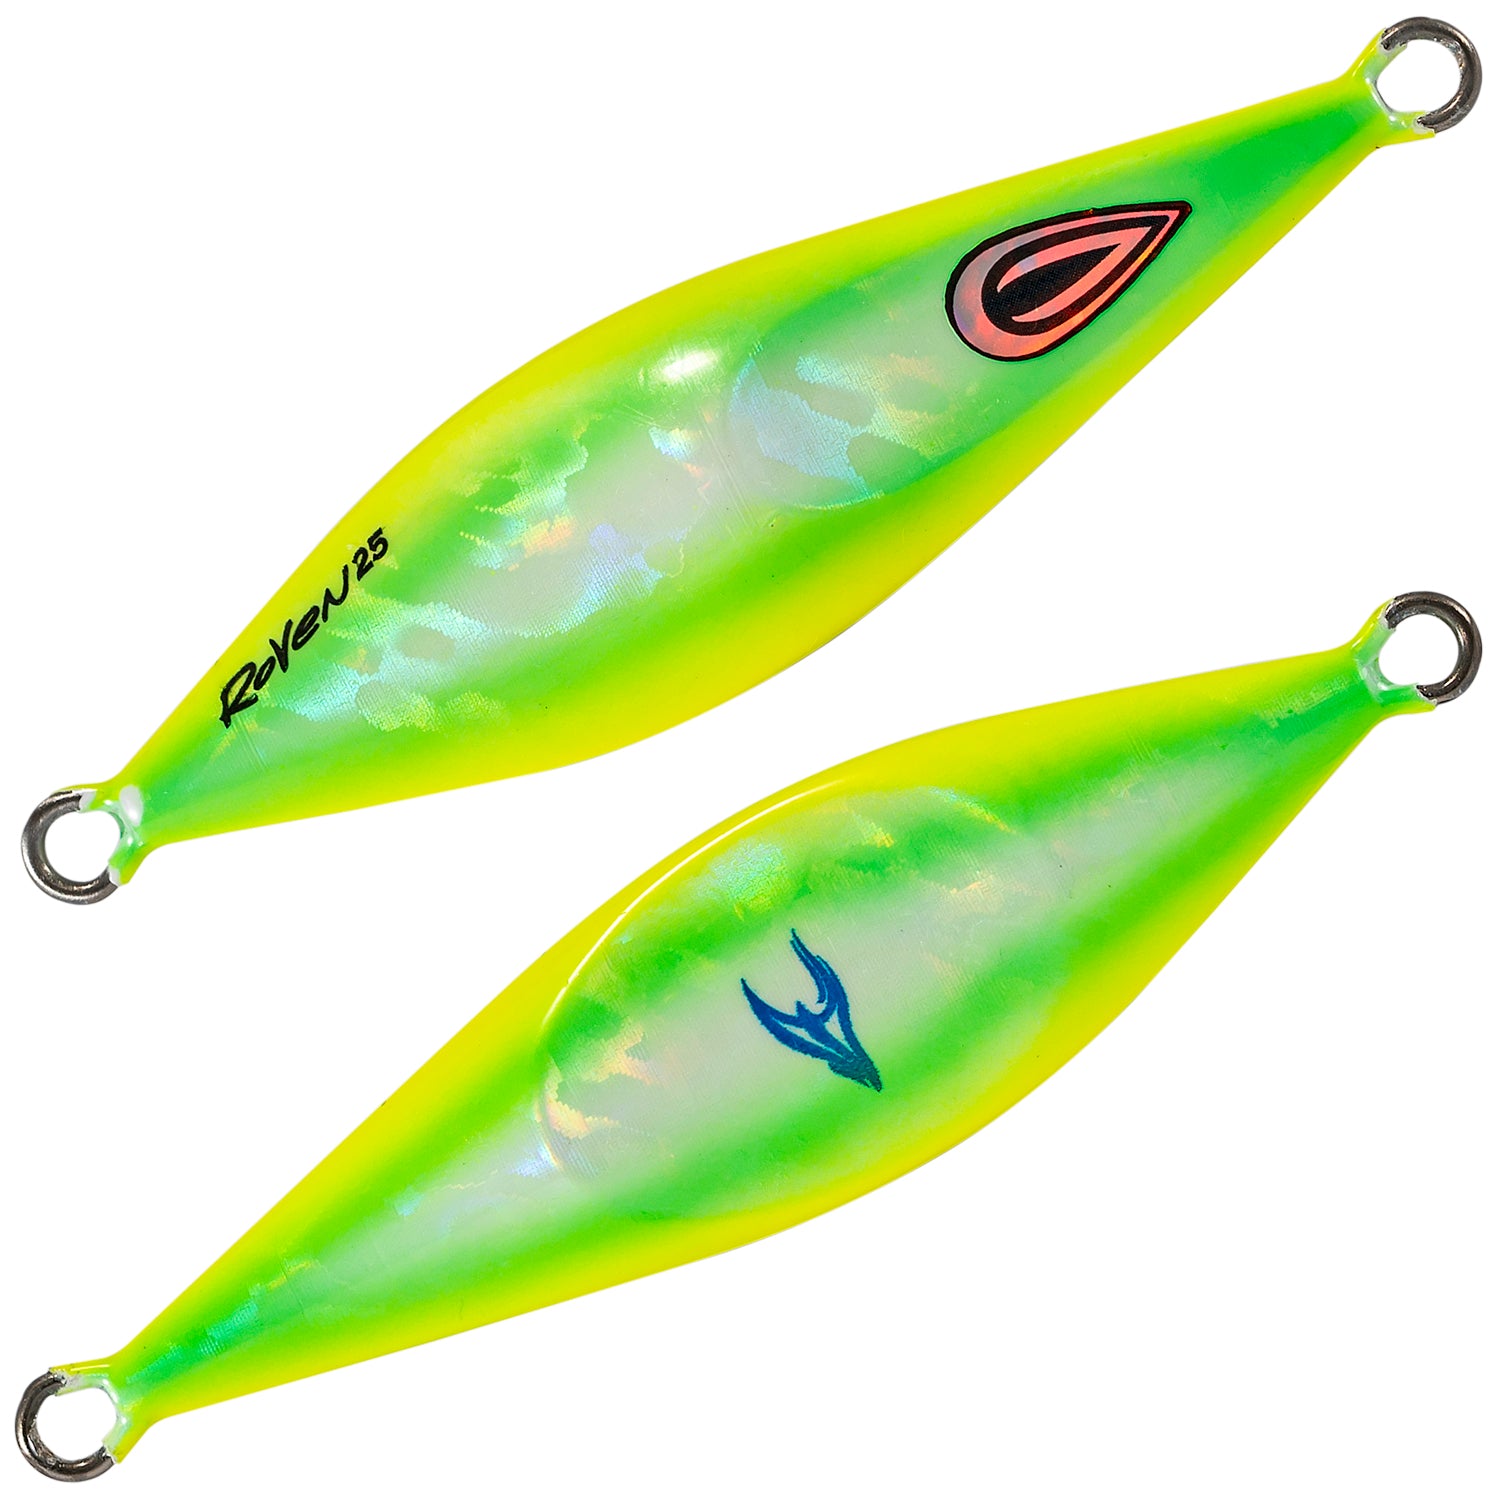 Oceans Legacy Roven Jig Rigged 6g 9